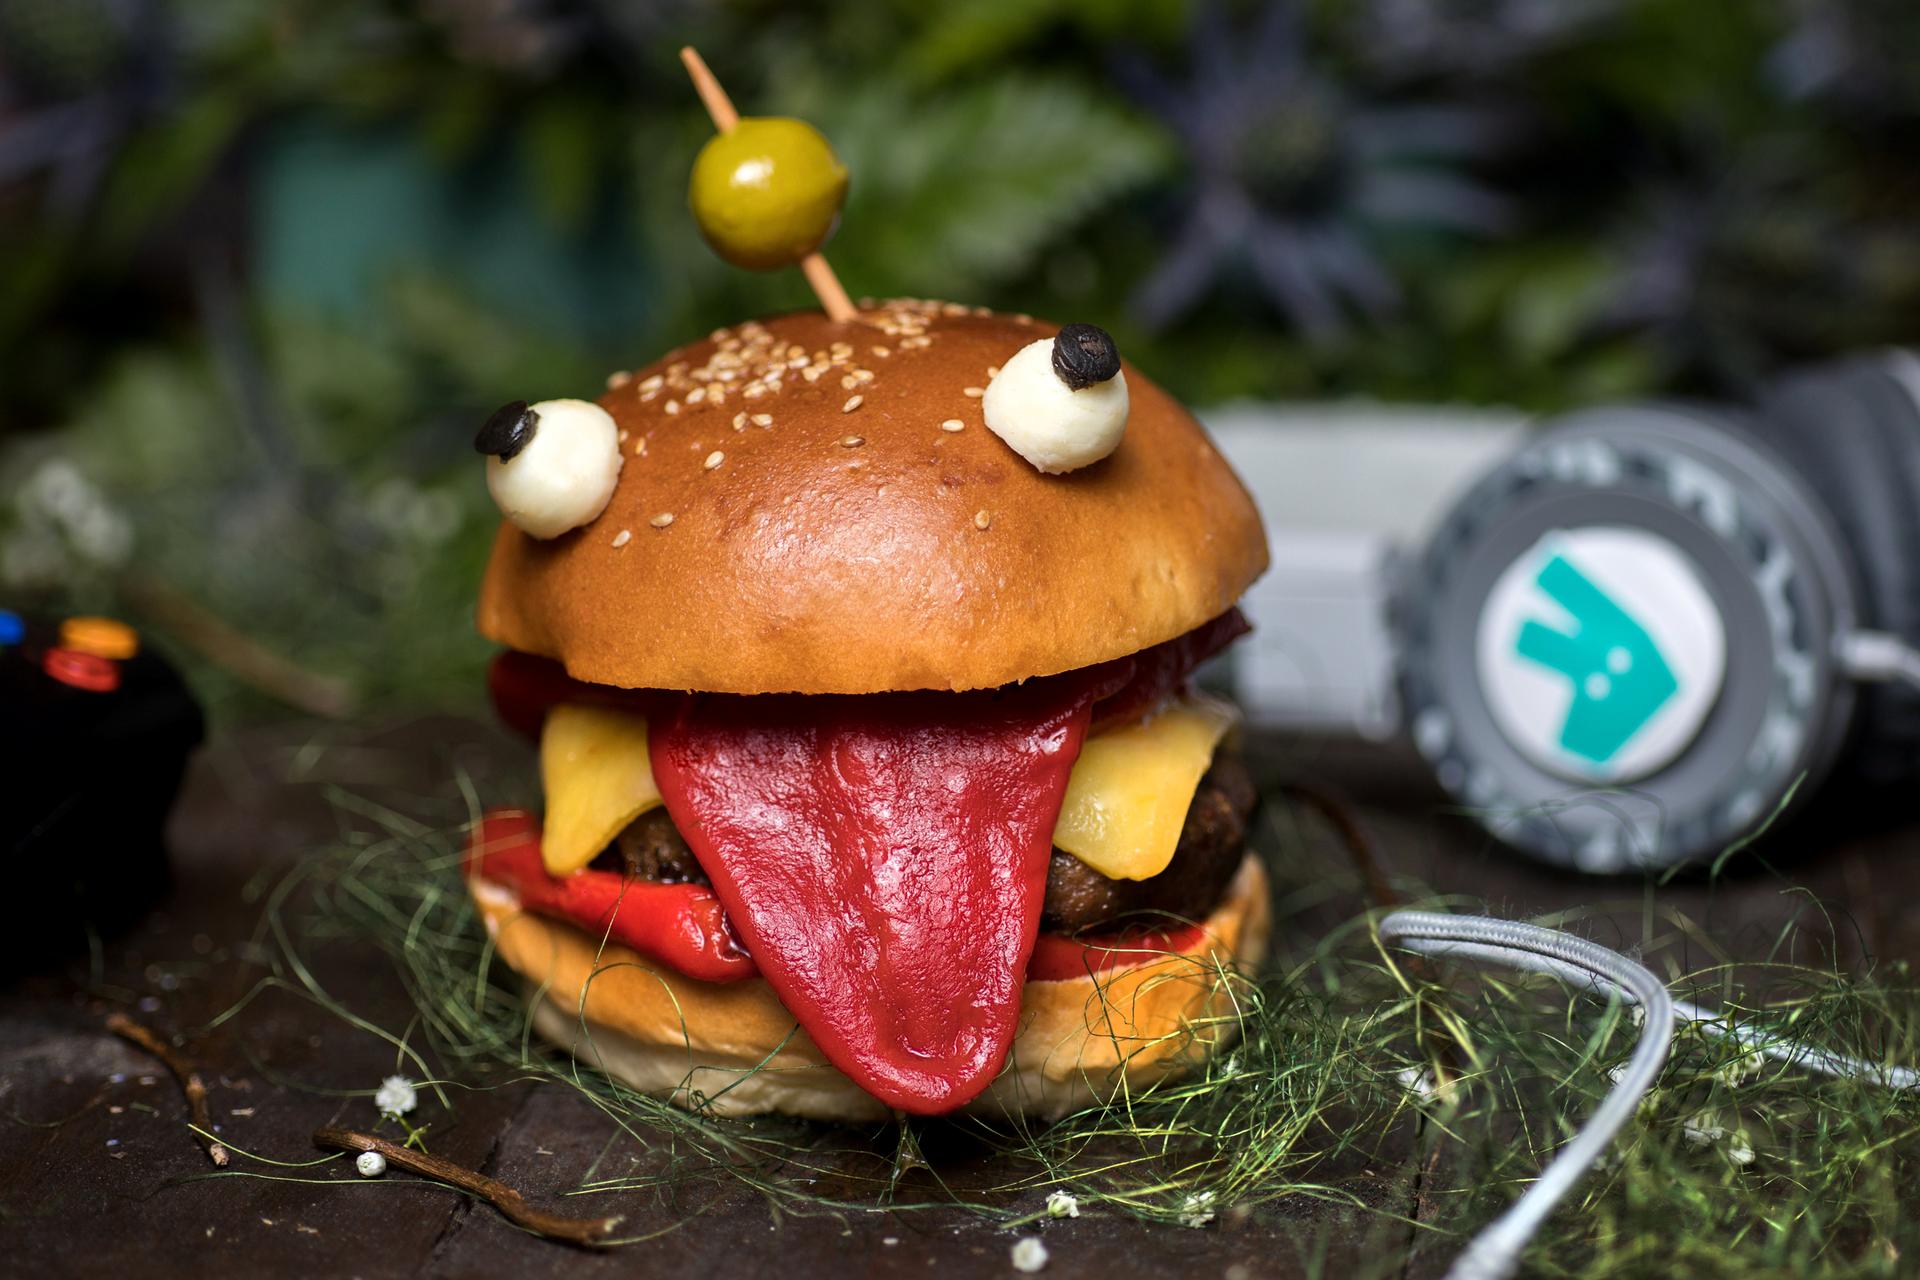 Wagyu Meets Durr Jones The Grocer Serves Limited Edition Fortnite Burger